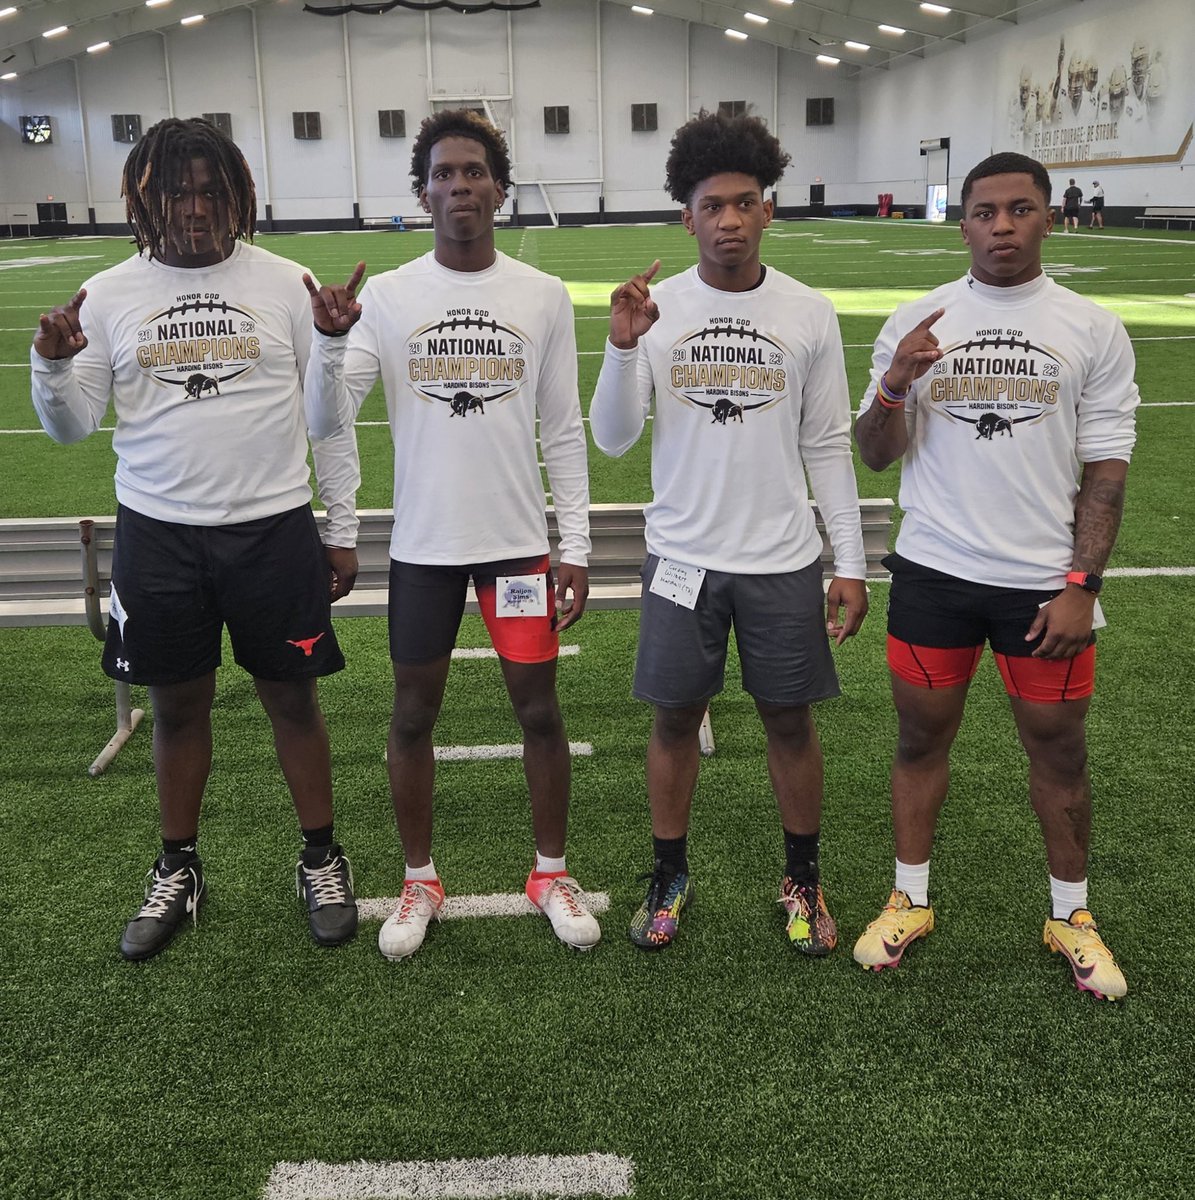 Thanks to @Harding_FB for letting our guys come out and compete!! @SemajGatson2 @TreTucker17 @Sims_Raijon @wcordiay